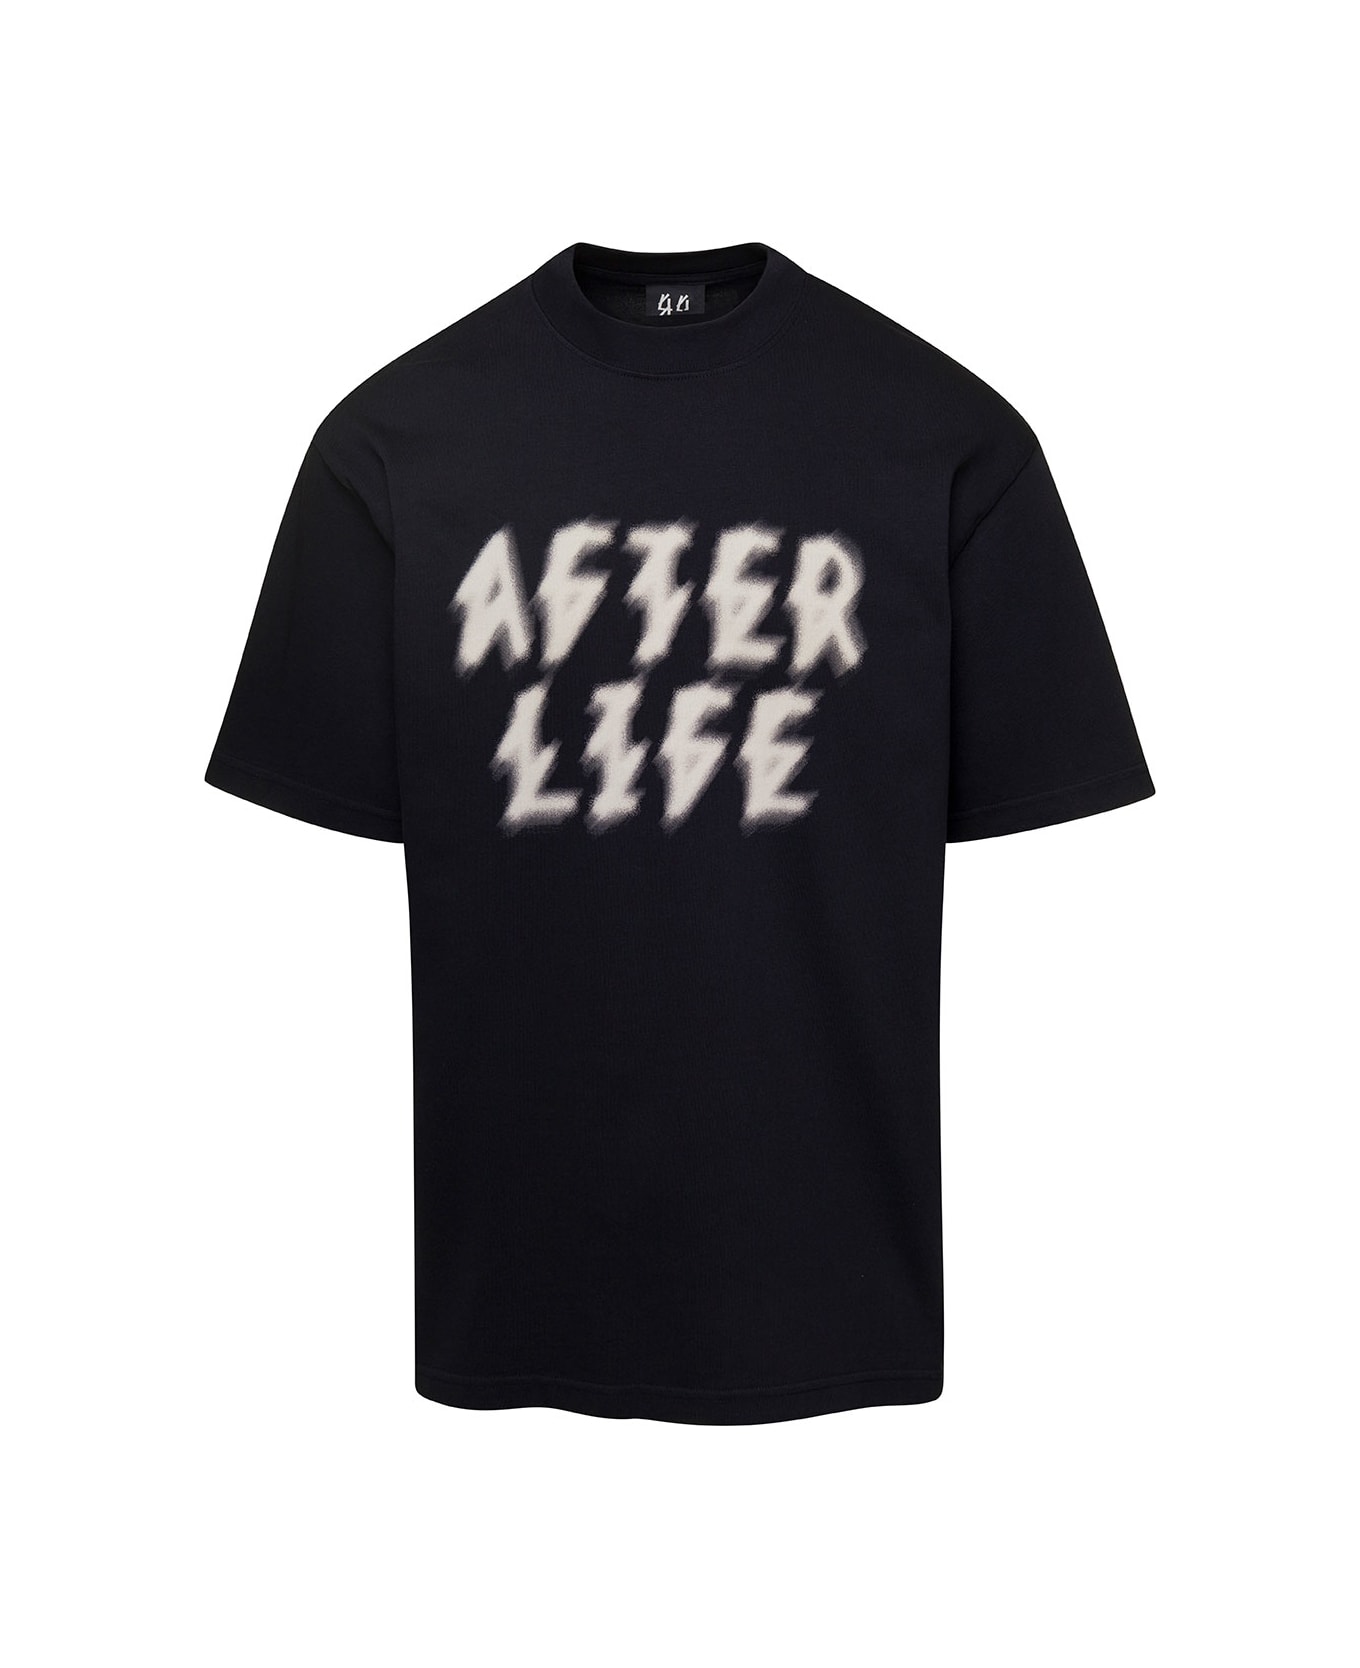 44 Label Group Black T-shirt With Logo Printed On Front And Back In Cotton Man シャツ